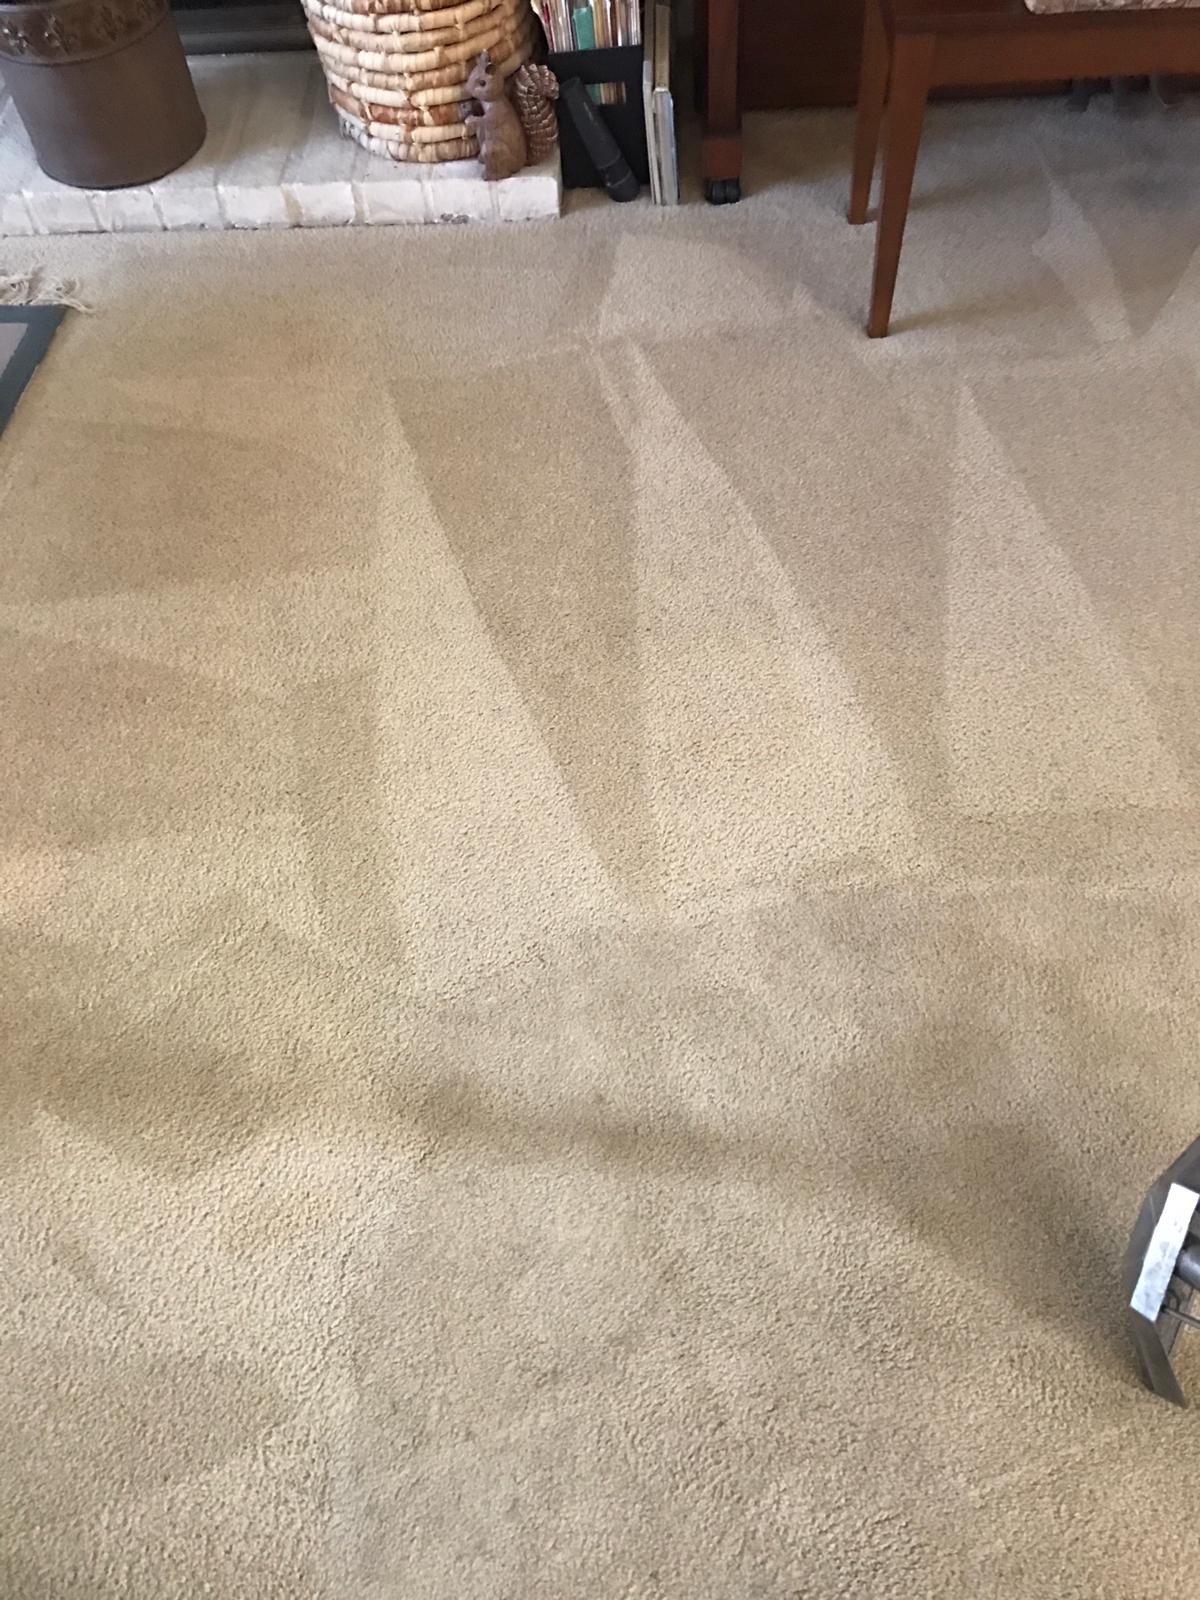 The 10 Best Carpet Cleaning Services Near Me (with Free Quotes)